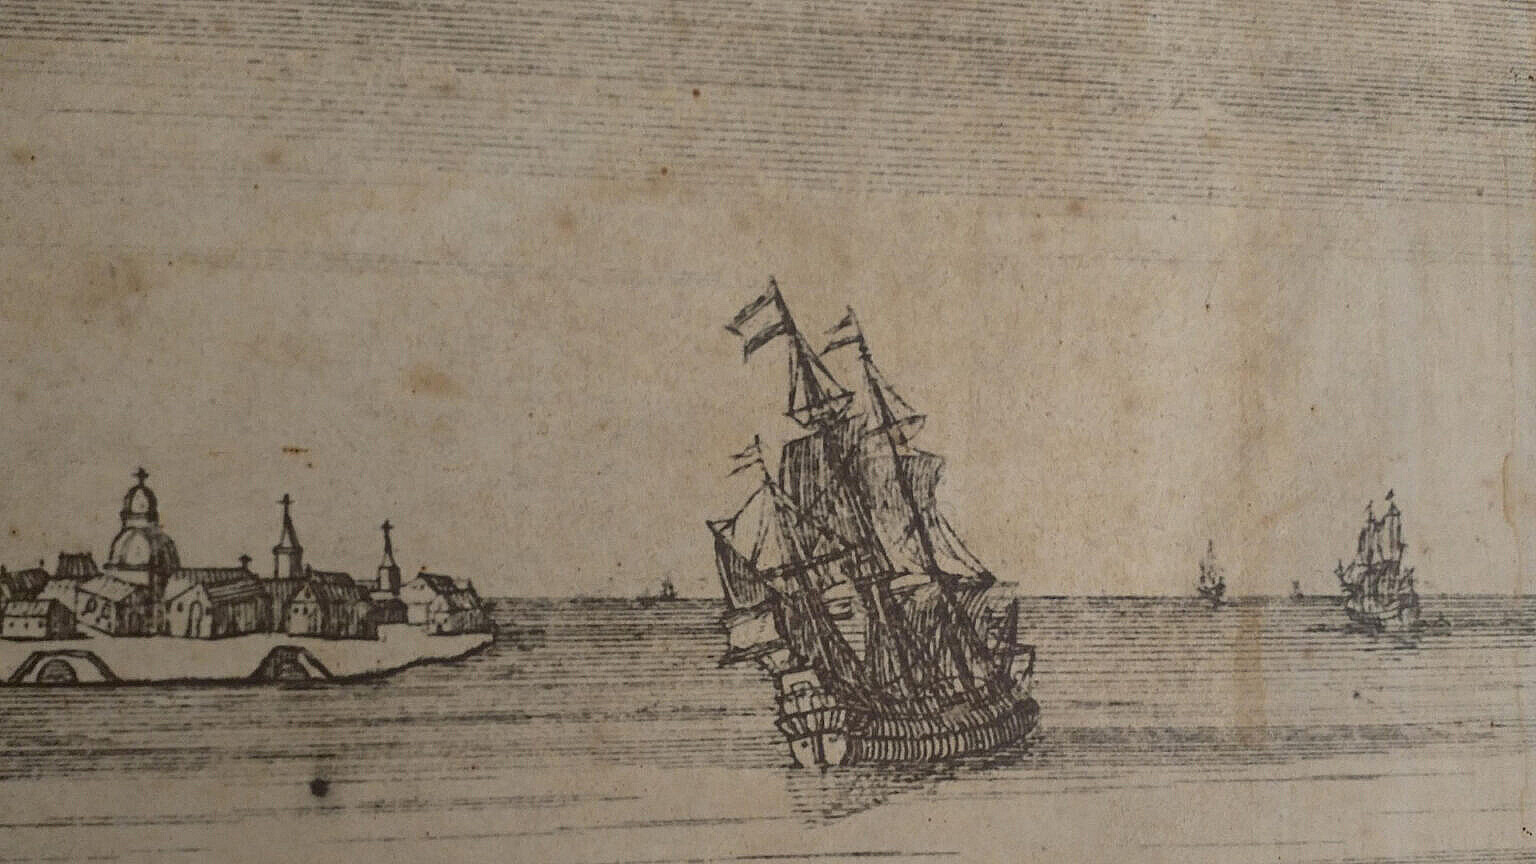 An incision of a Venetian galleon